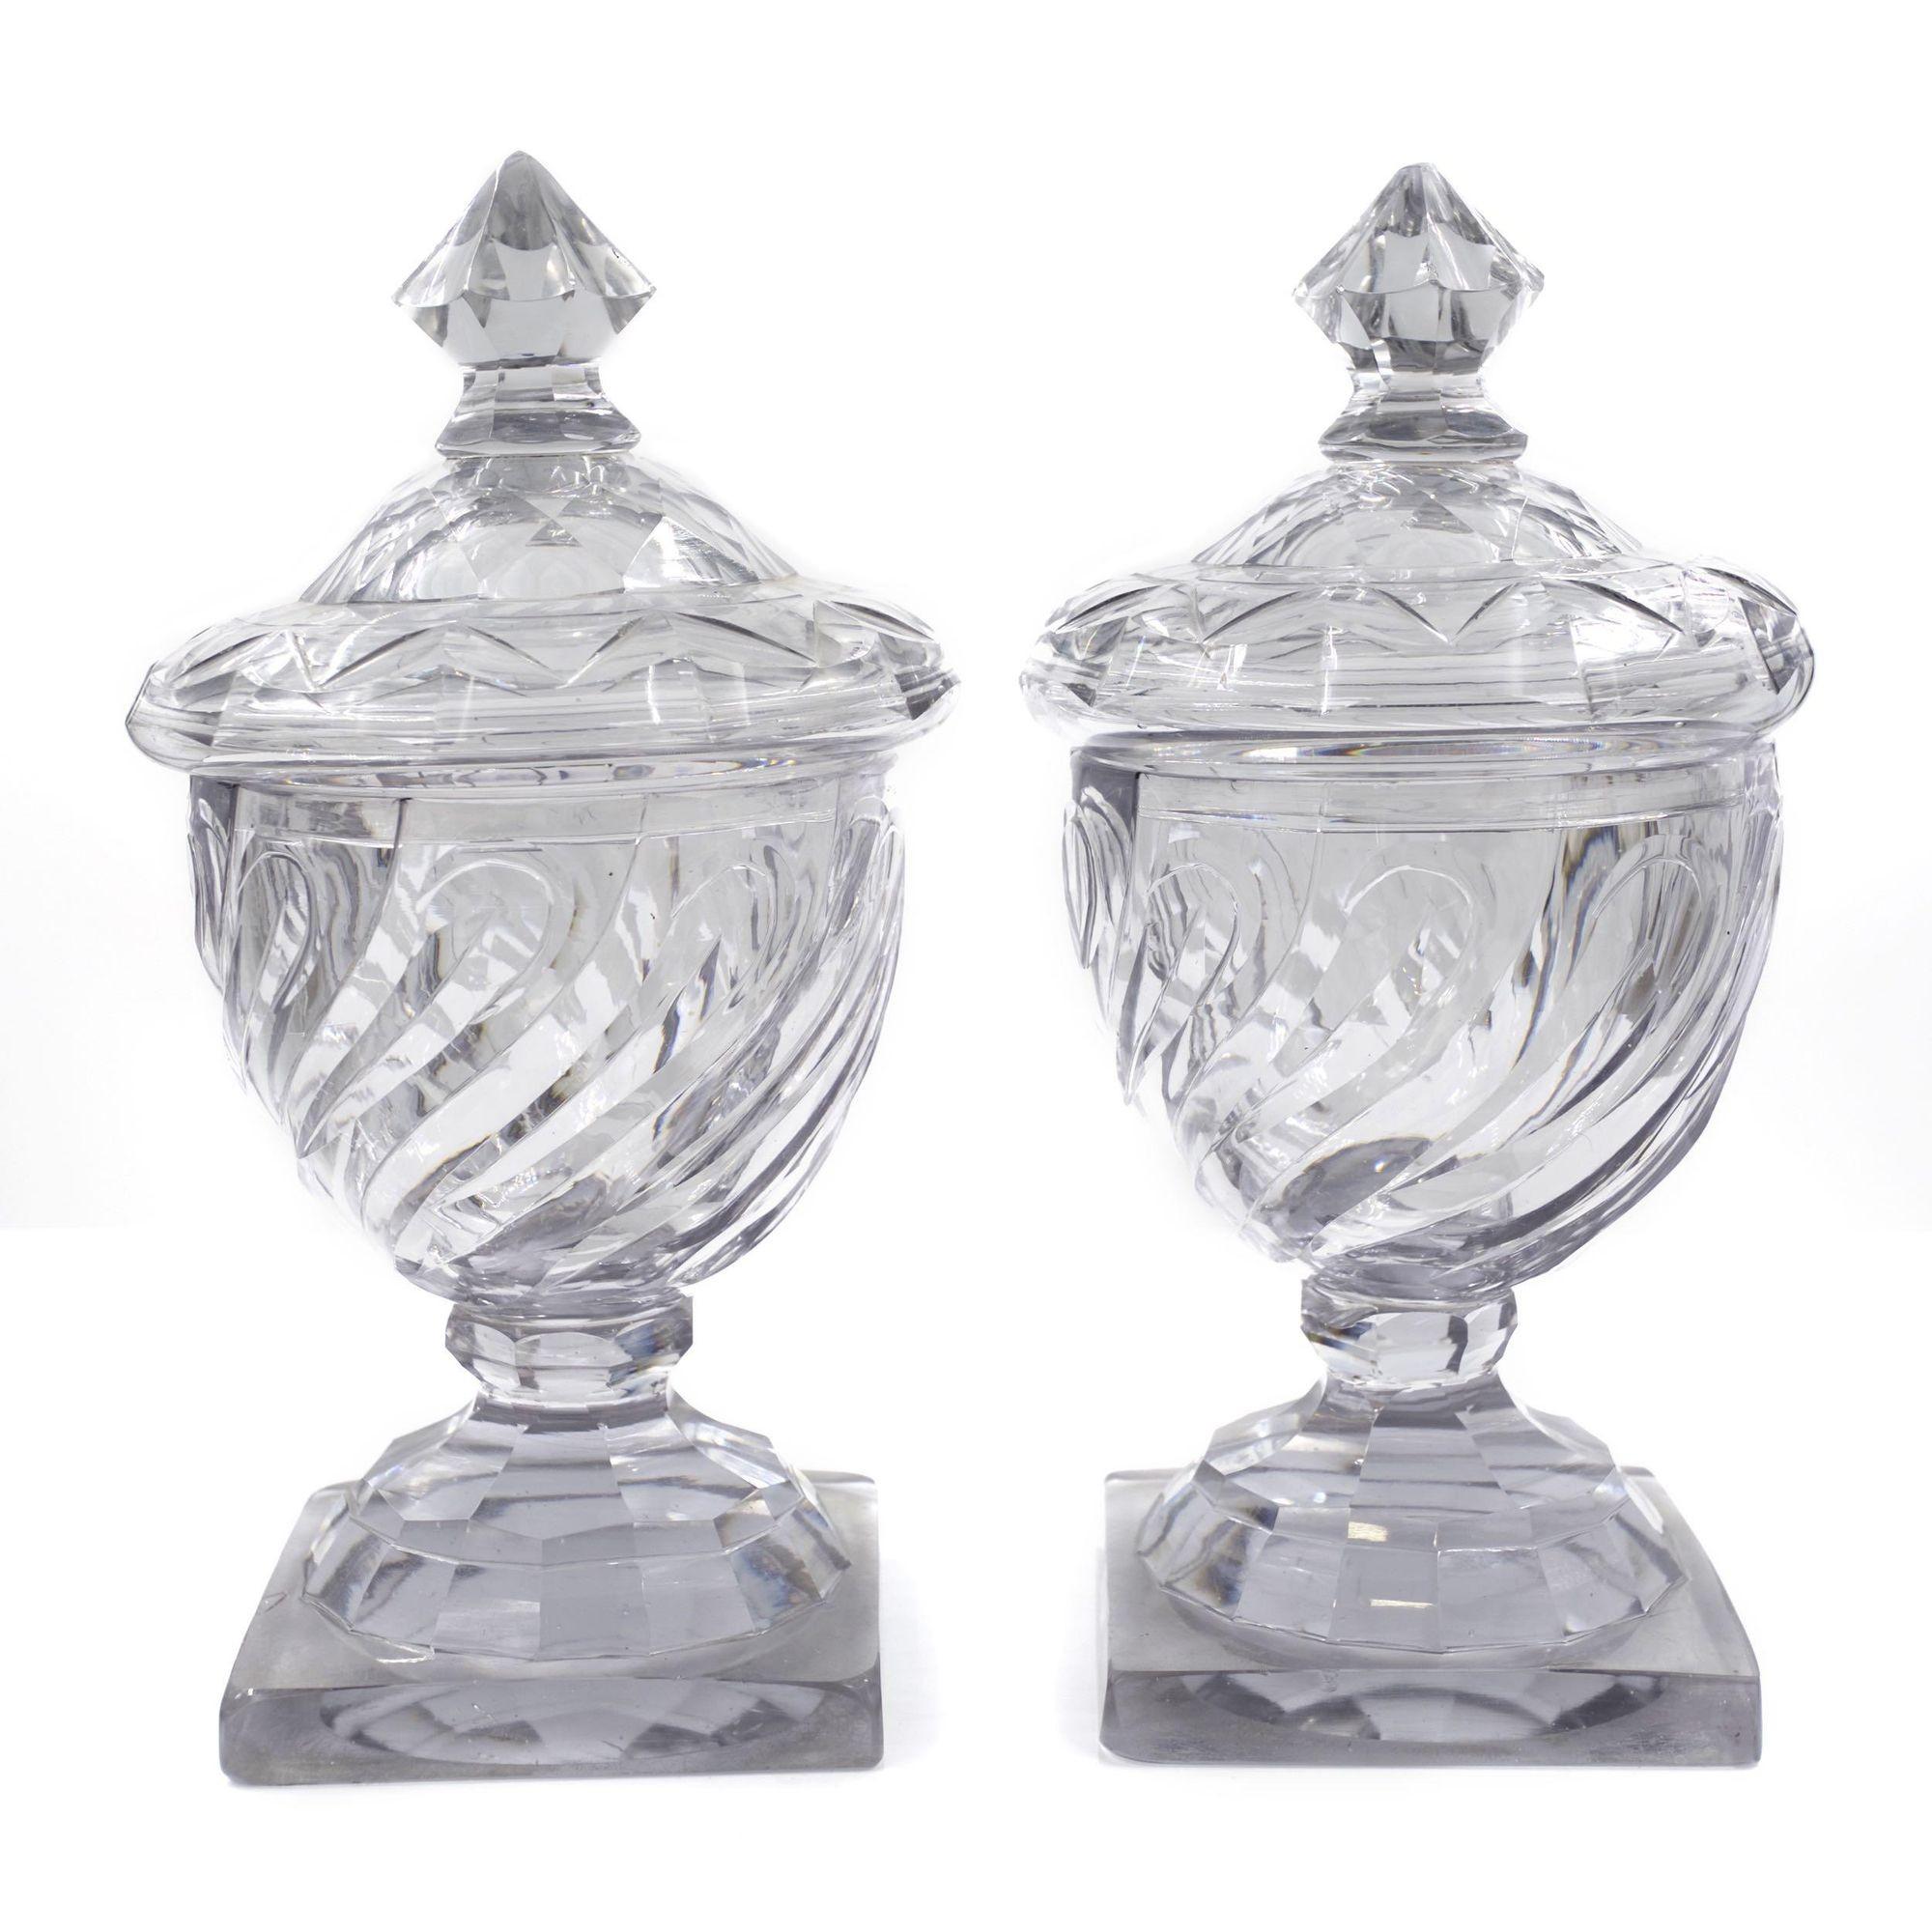 British 18th Century Pair of English Georgian Cut Swirled Glass Urns with Dome Lids For Sale